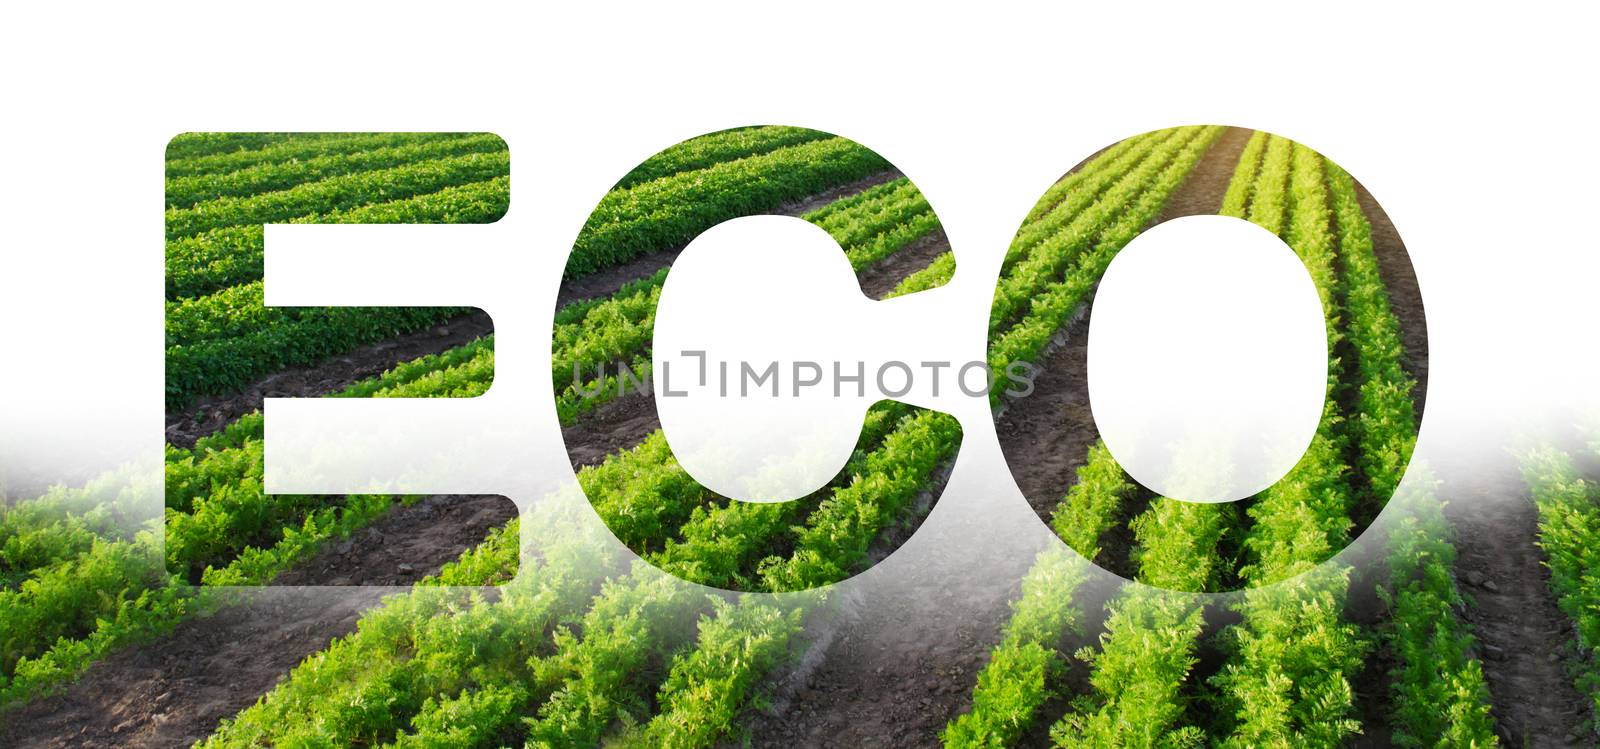 Eco inscription on the background of Carrot plantation field. Environmentally friendly harvest, quality control and use of safe pesticides. Vegetable rows. Organic vegetables. Landscape agriculture. by iLixe48